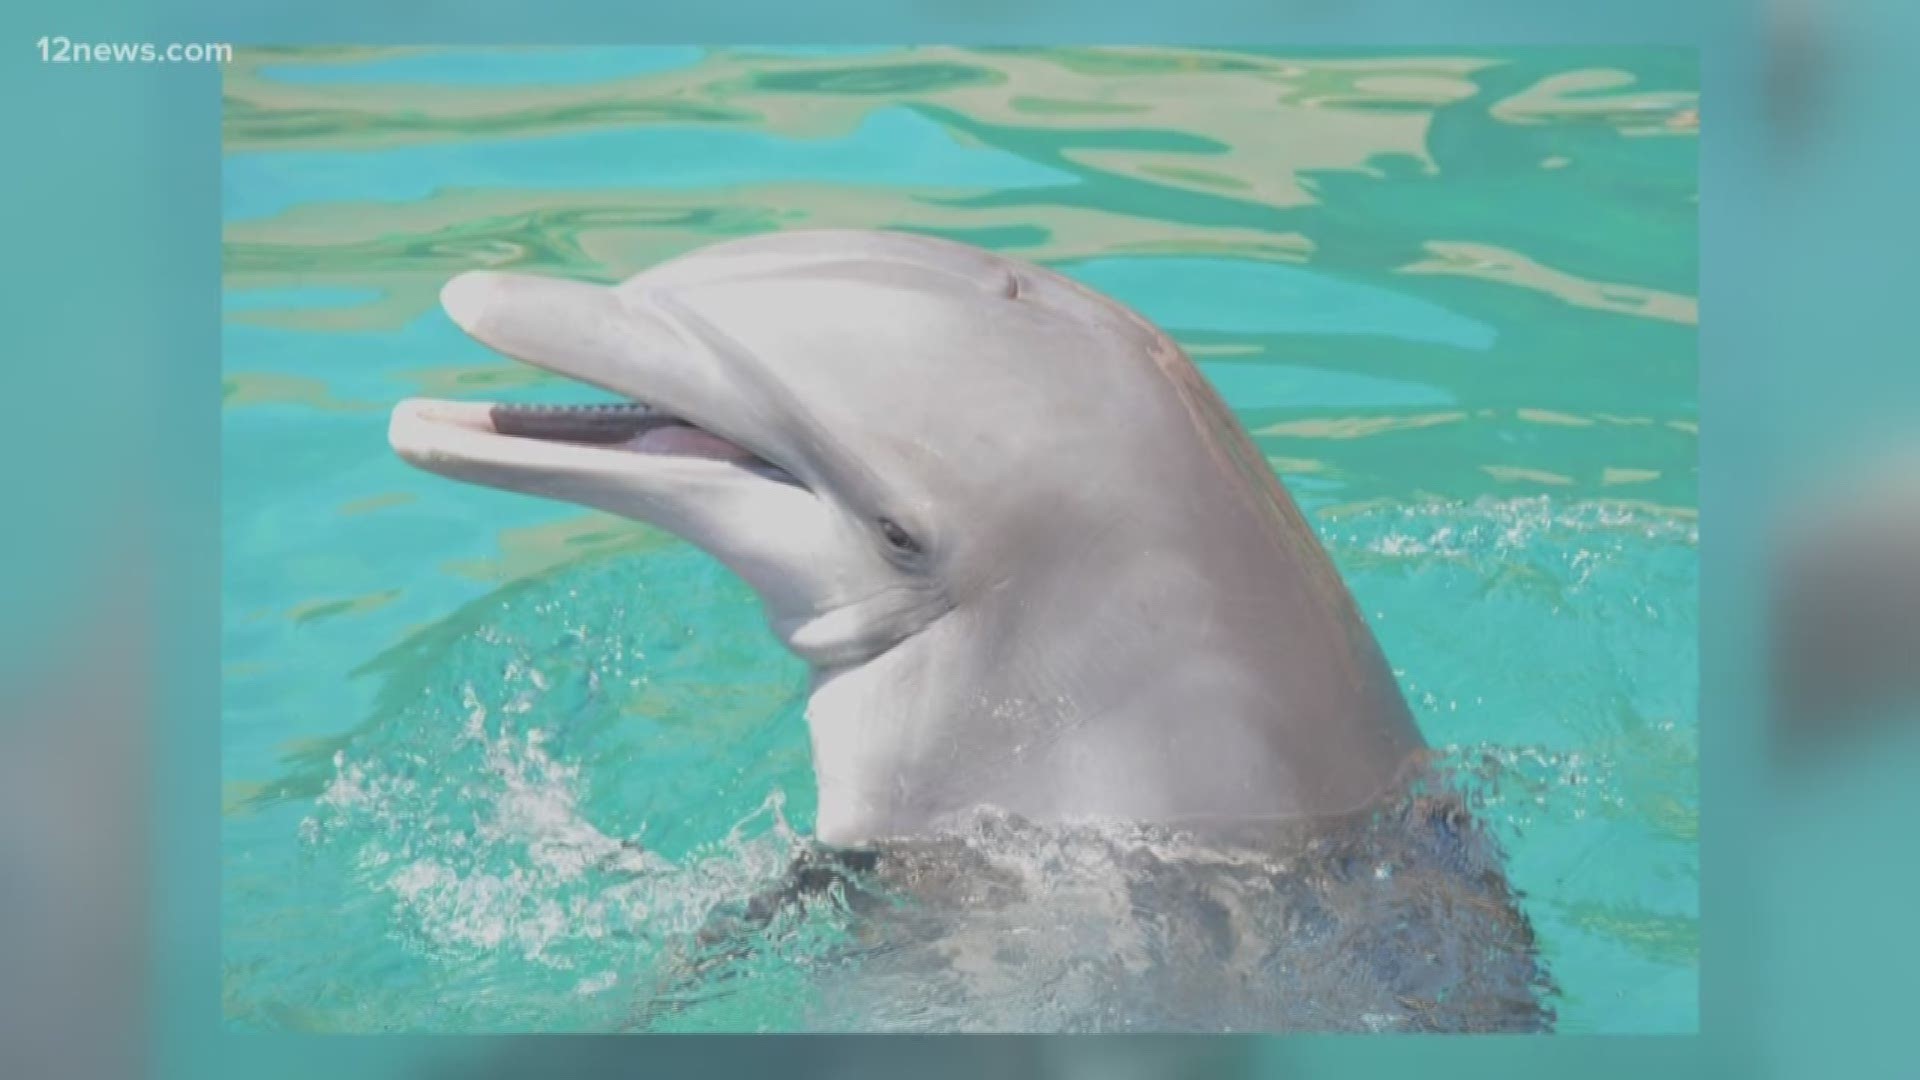 A fourth dolphin, Kai, has died at the Scottsdale attraction, Dolphinaris. He was 22.